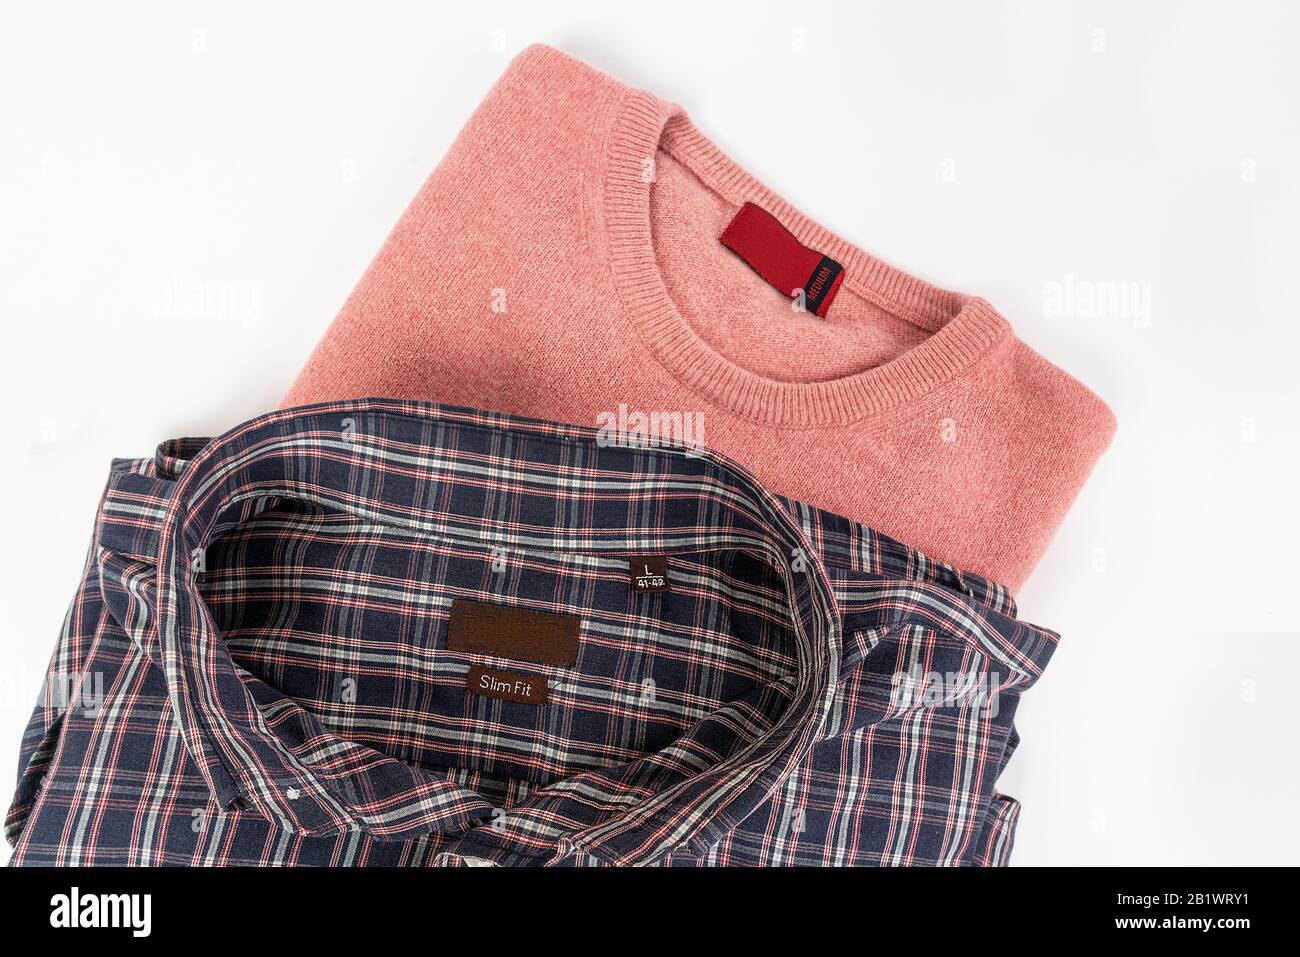 a pink wool sweater and a checkered shirt on a white surface Stock Photo